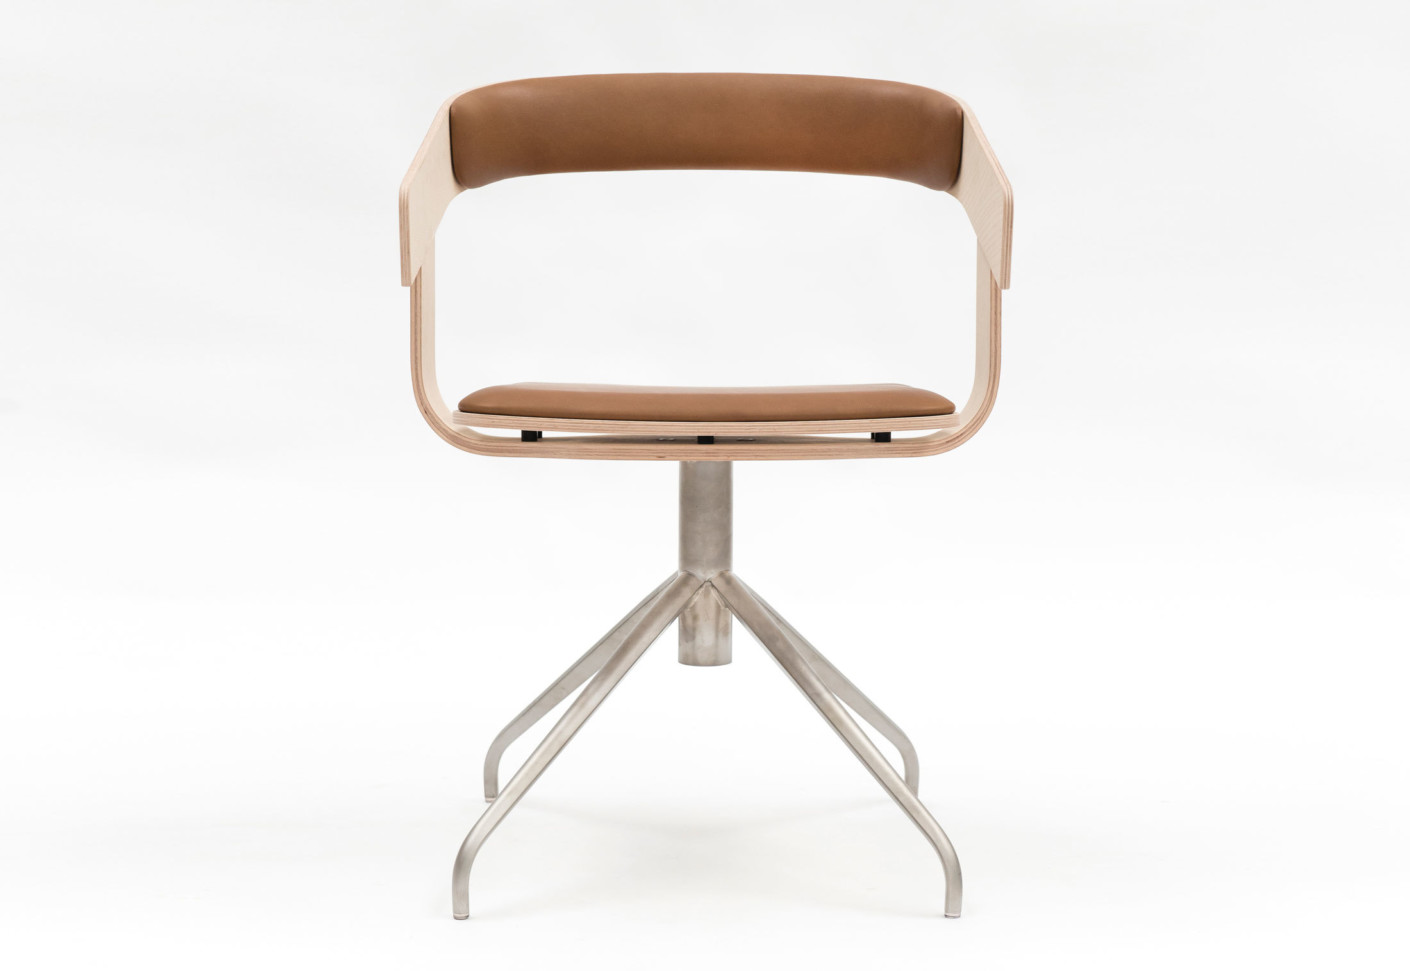 BuzziFloat Chair by Alain Gilles for BuzziSpace